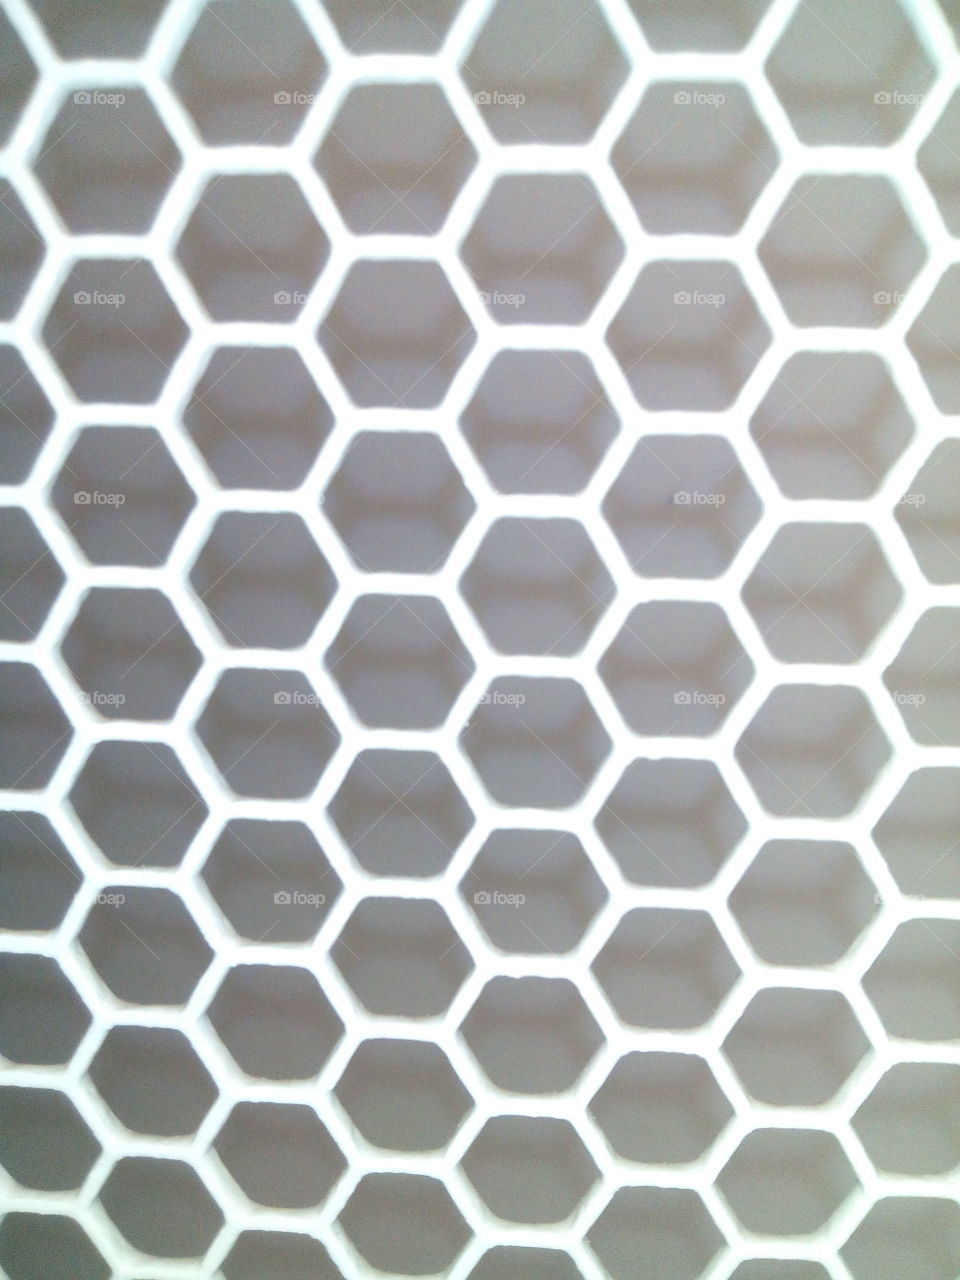 metal grille in the form of a honeycomb